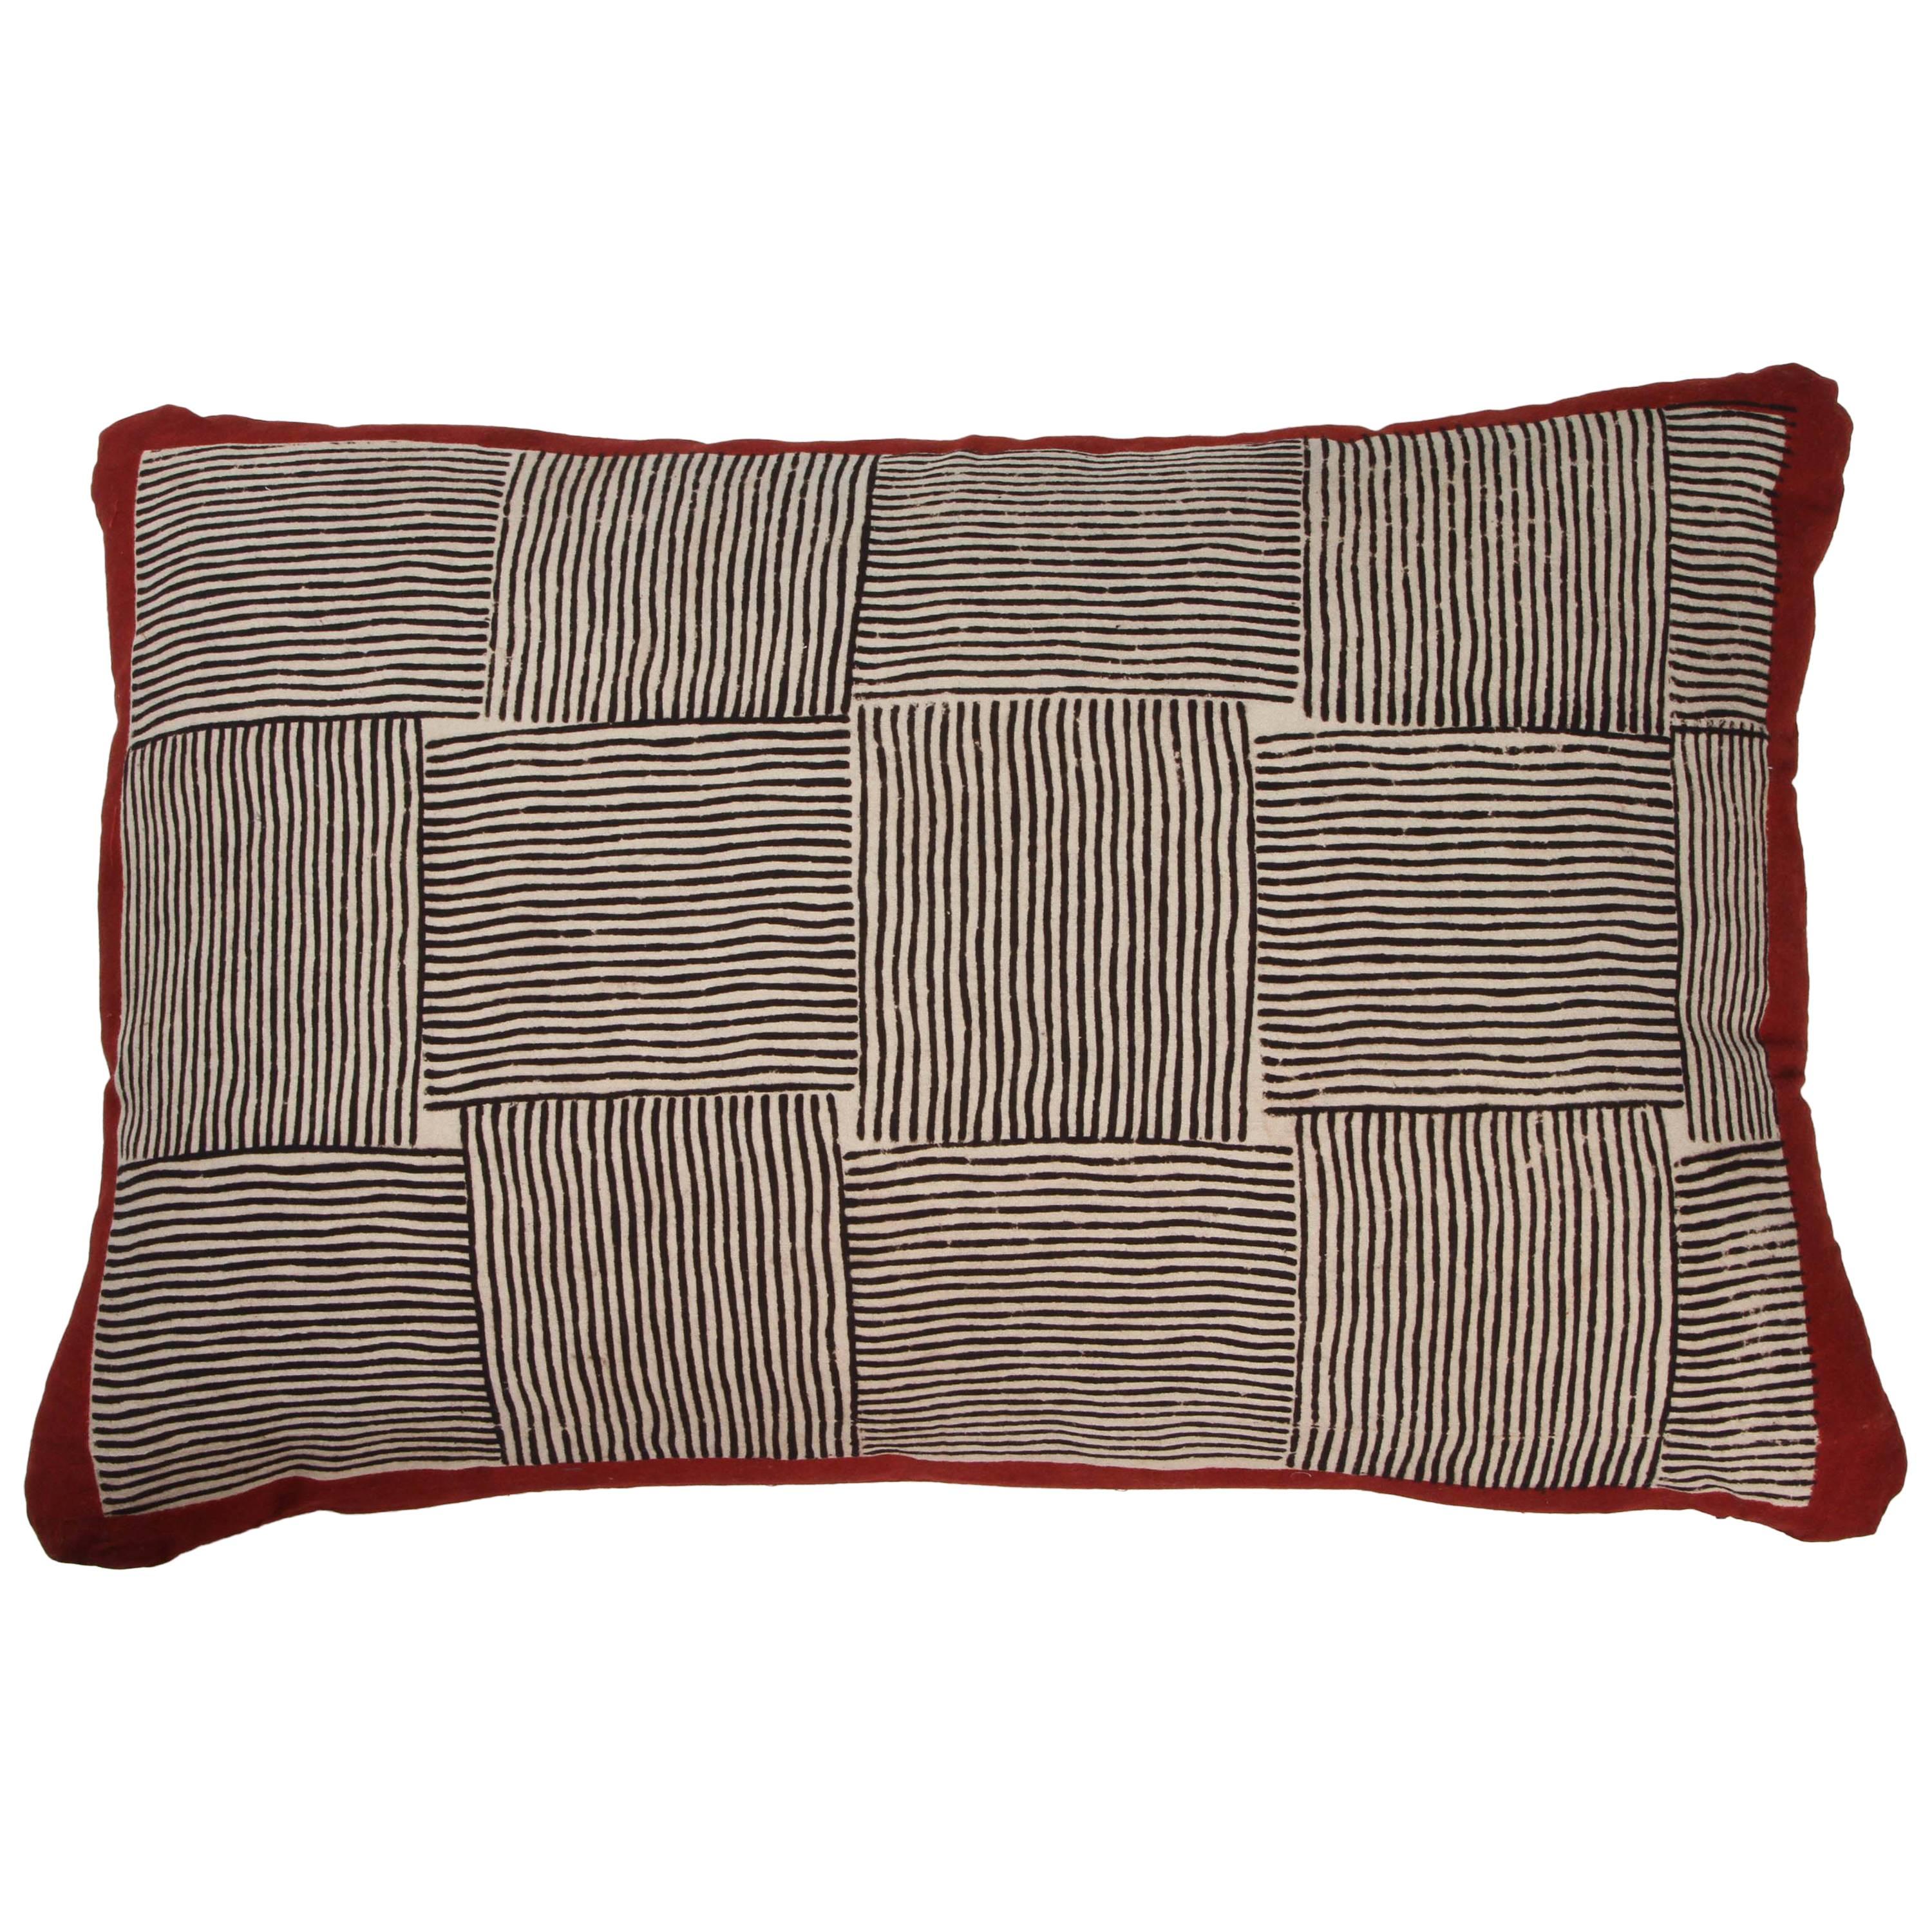 Gopal Indian Cotton Block Print Pillow, Black, White and Red For Sale